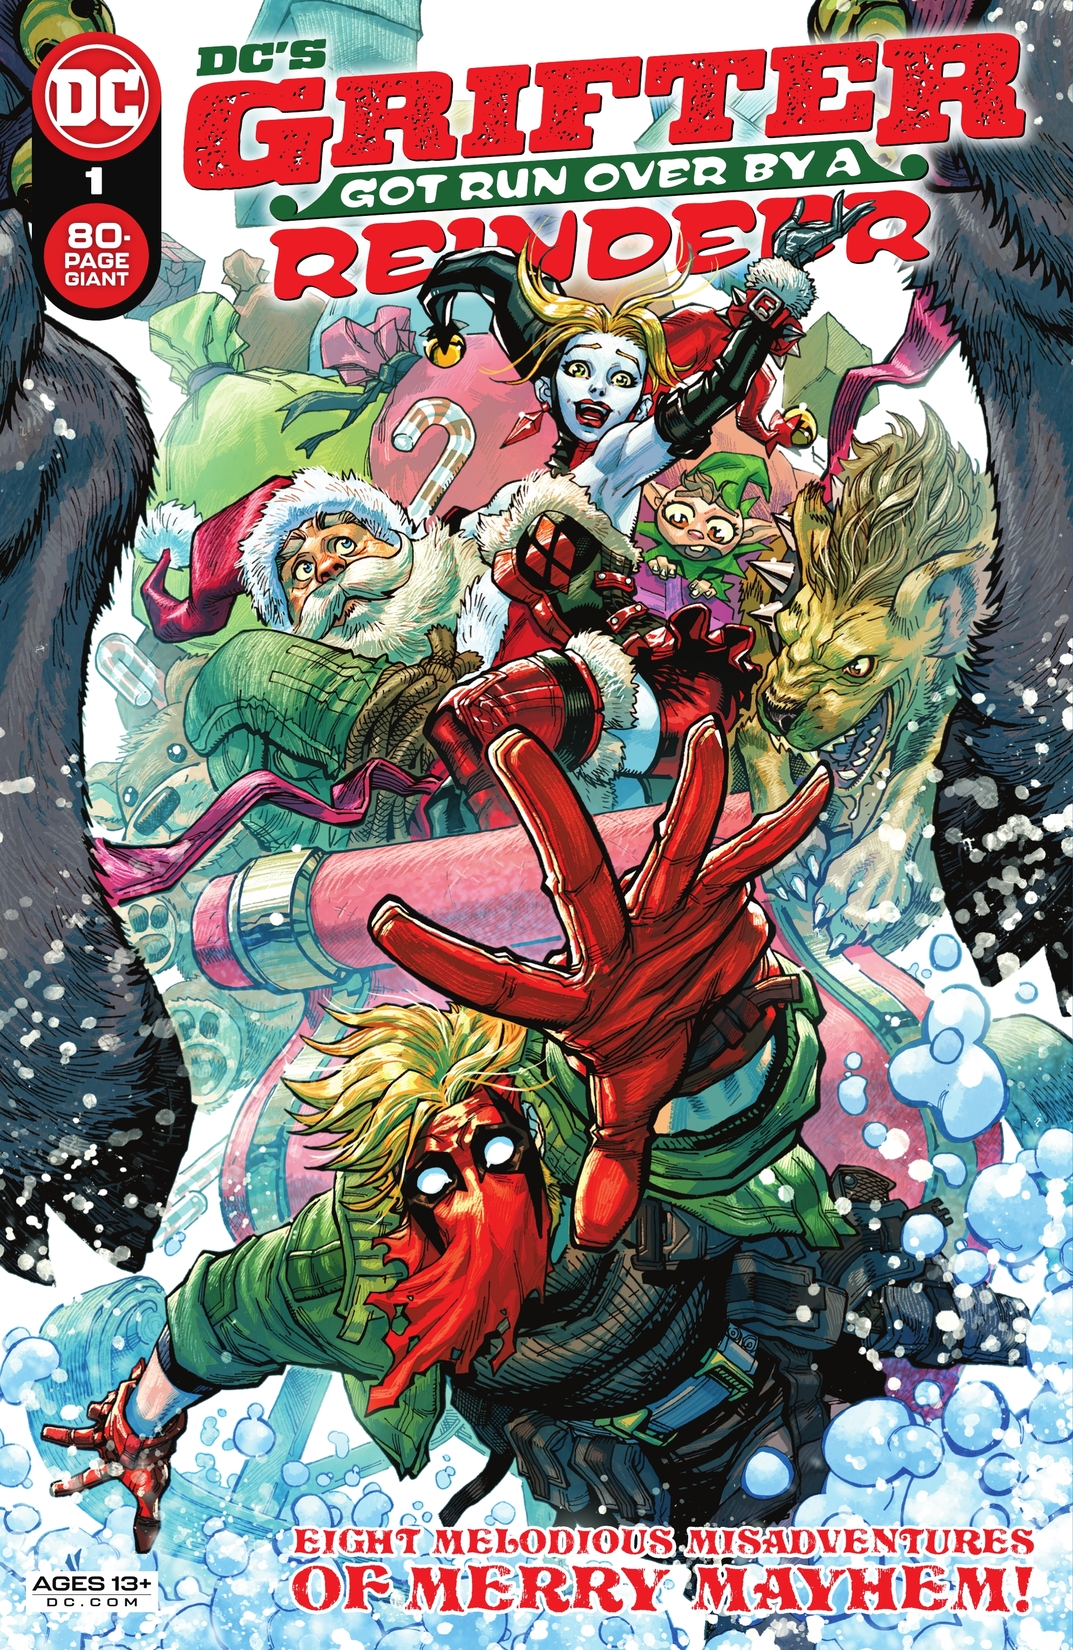 DC's Grifter Got Run Over by a Reindeer #1 preview images